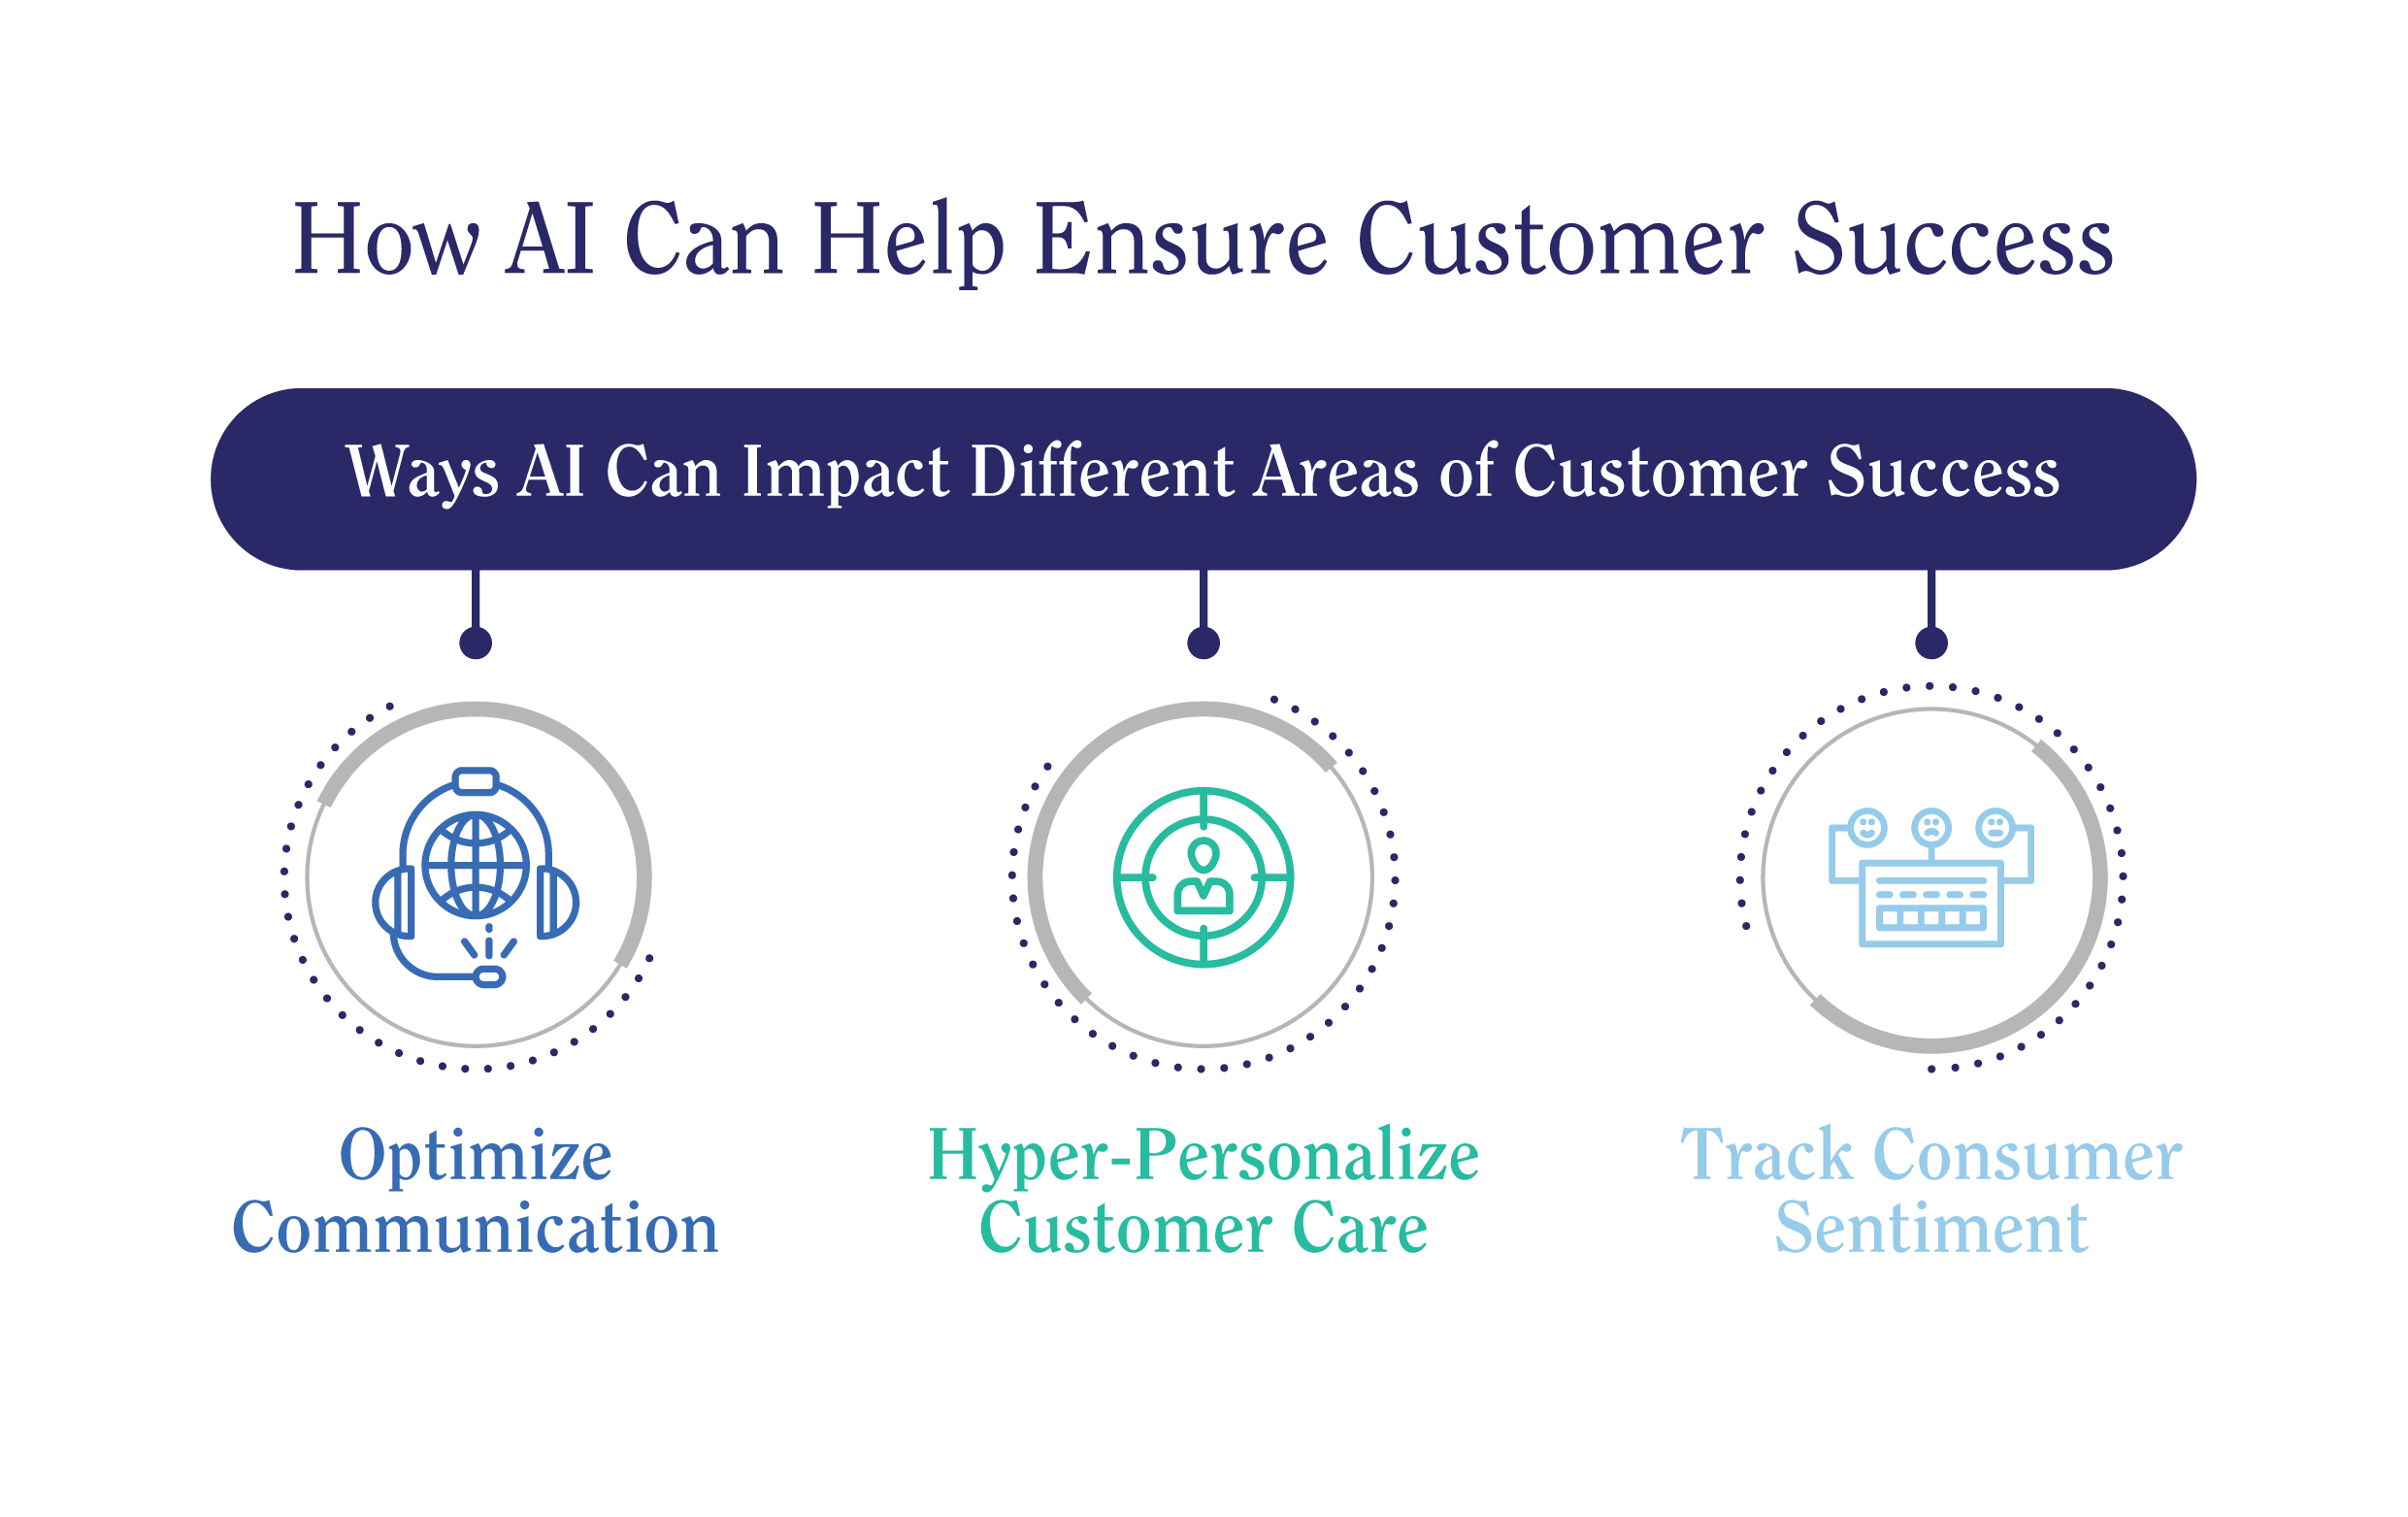 How AI can help customer care agents